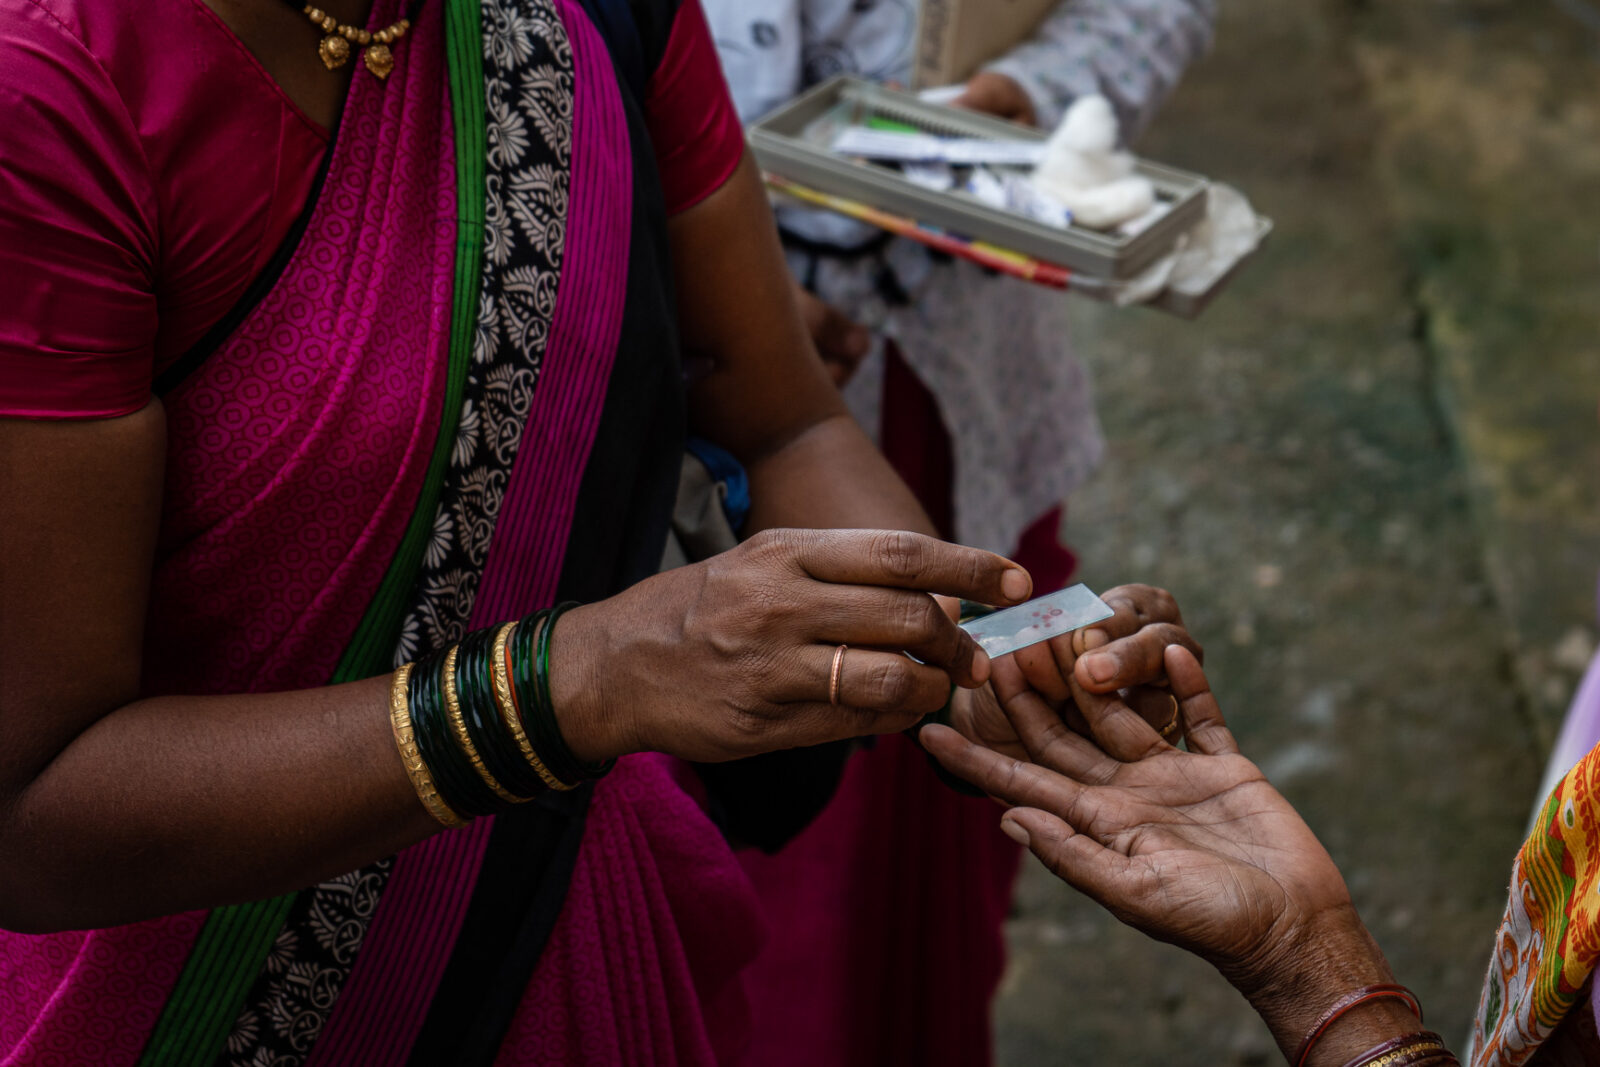 A woman collects a blood sample from another woman's hand.